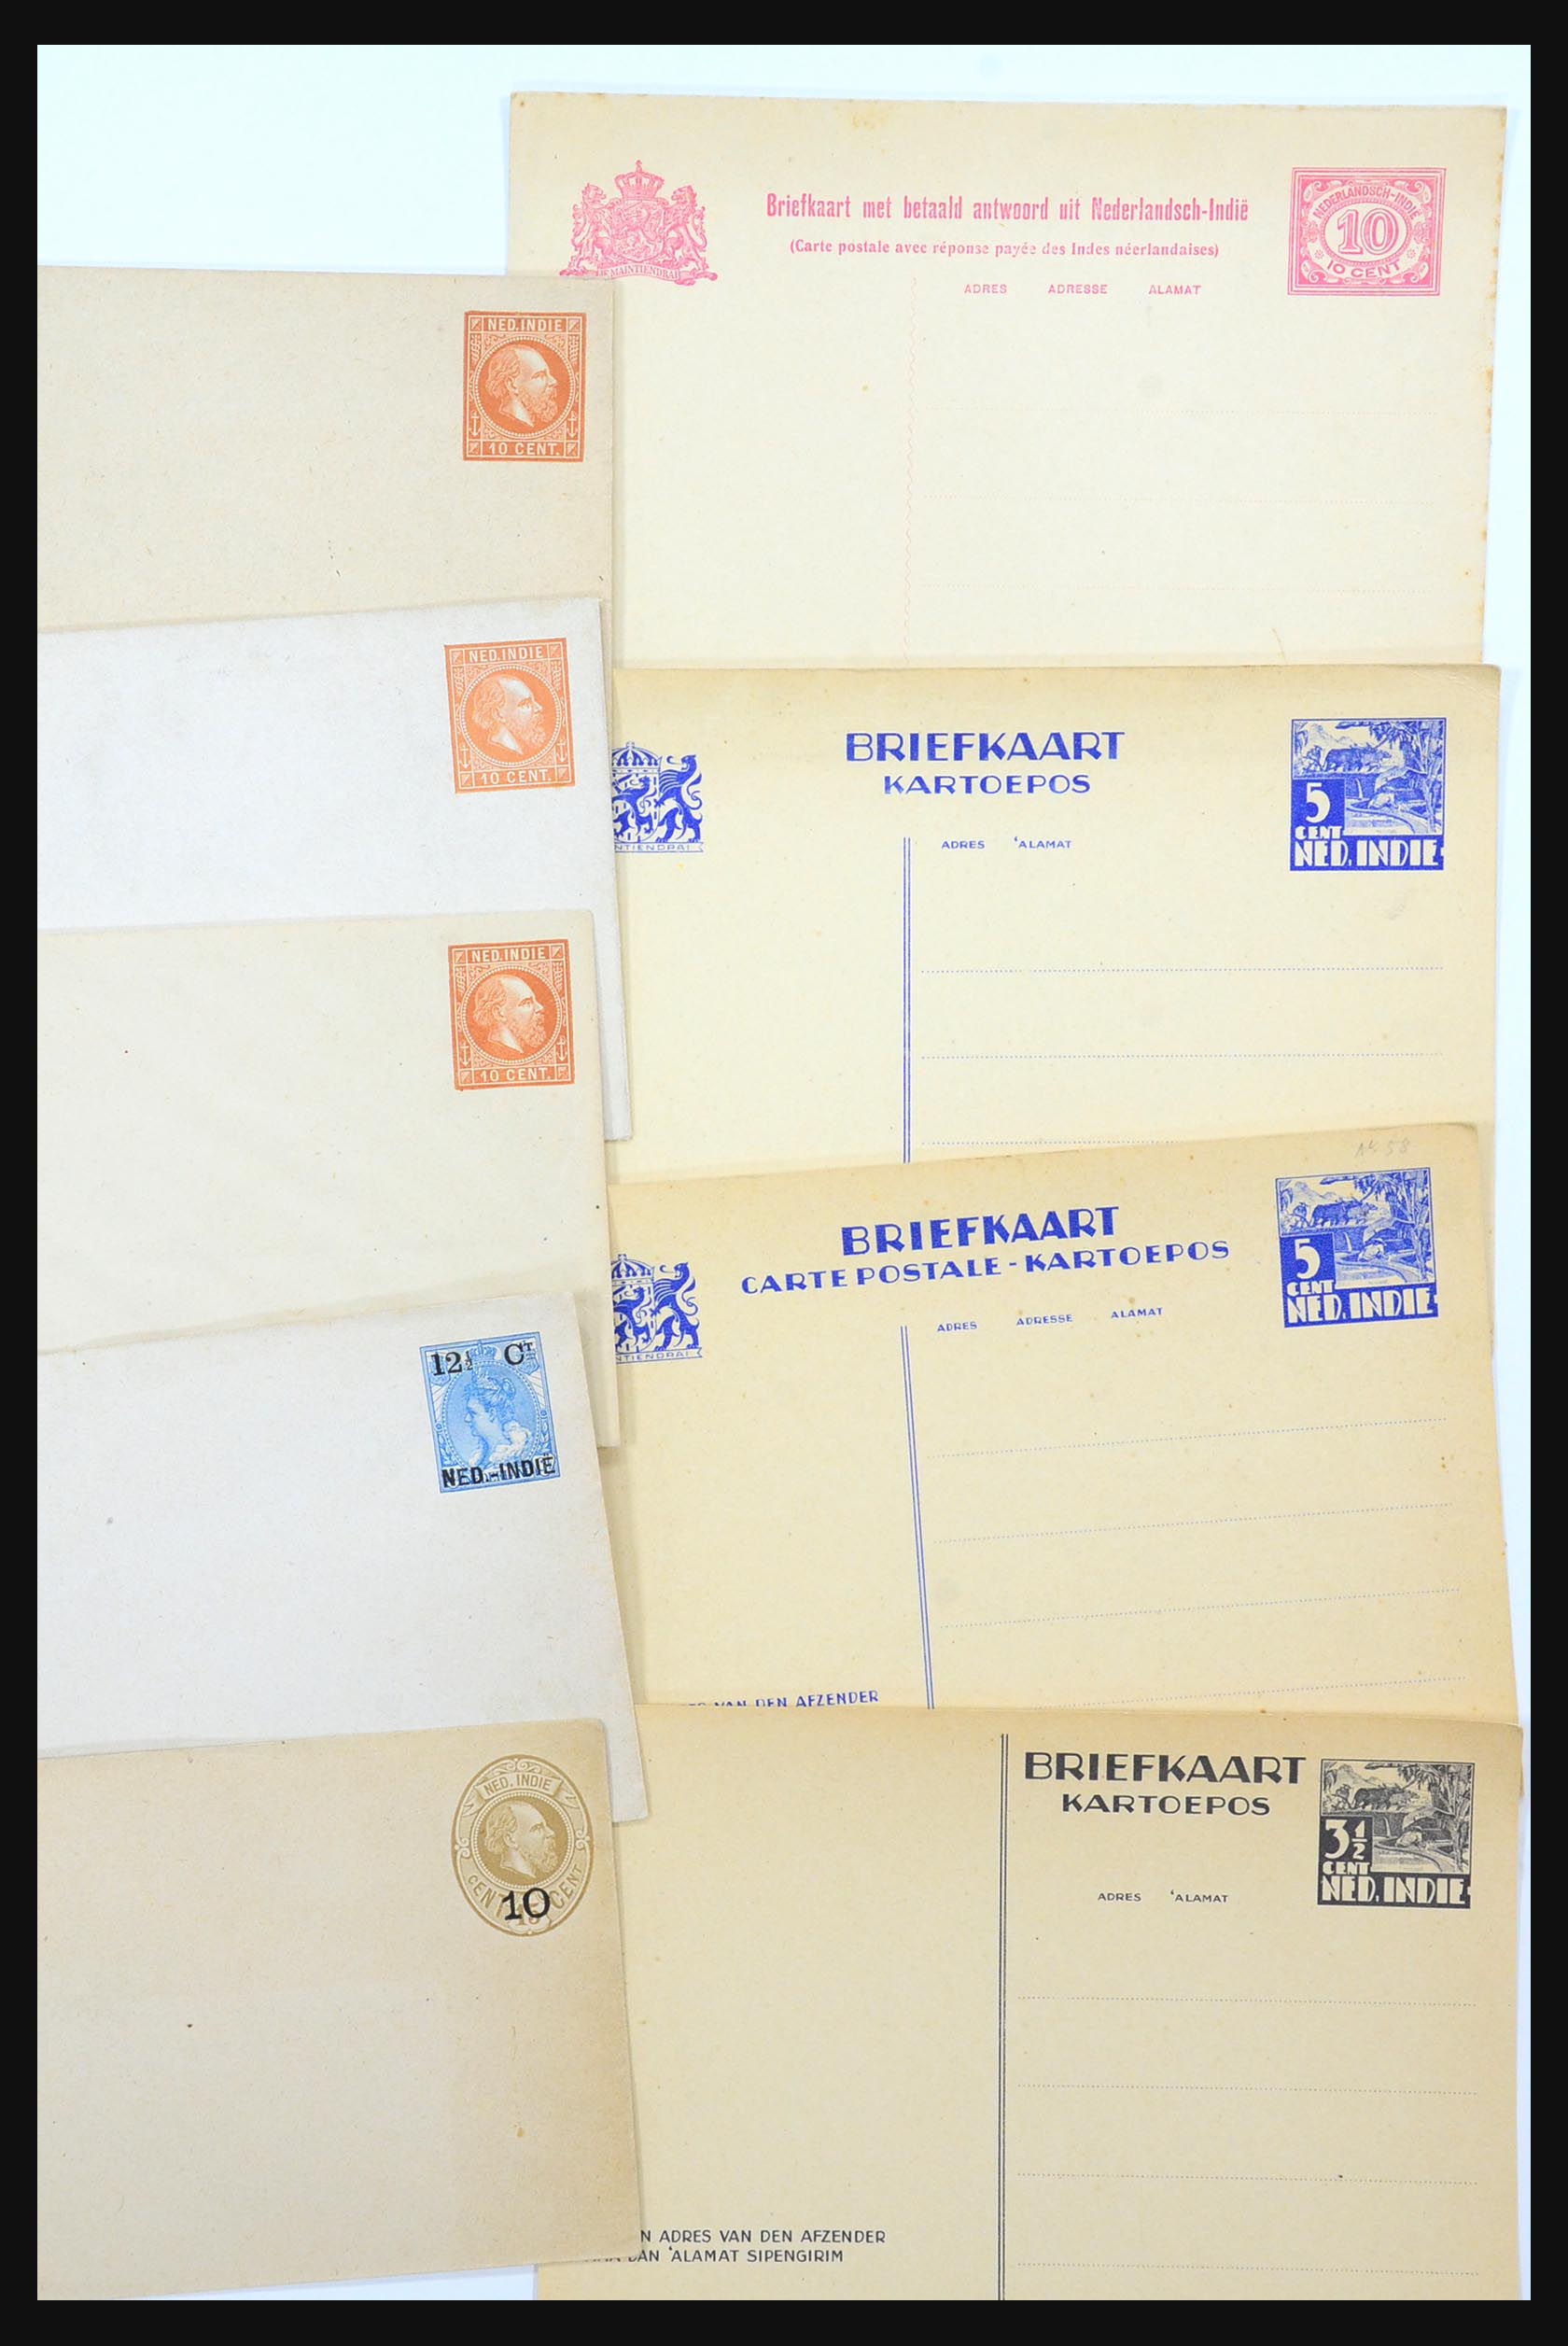 31361 028 - 31361 Netherlands Indies covers 1880-1950.